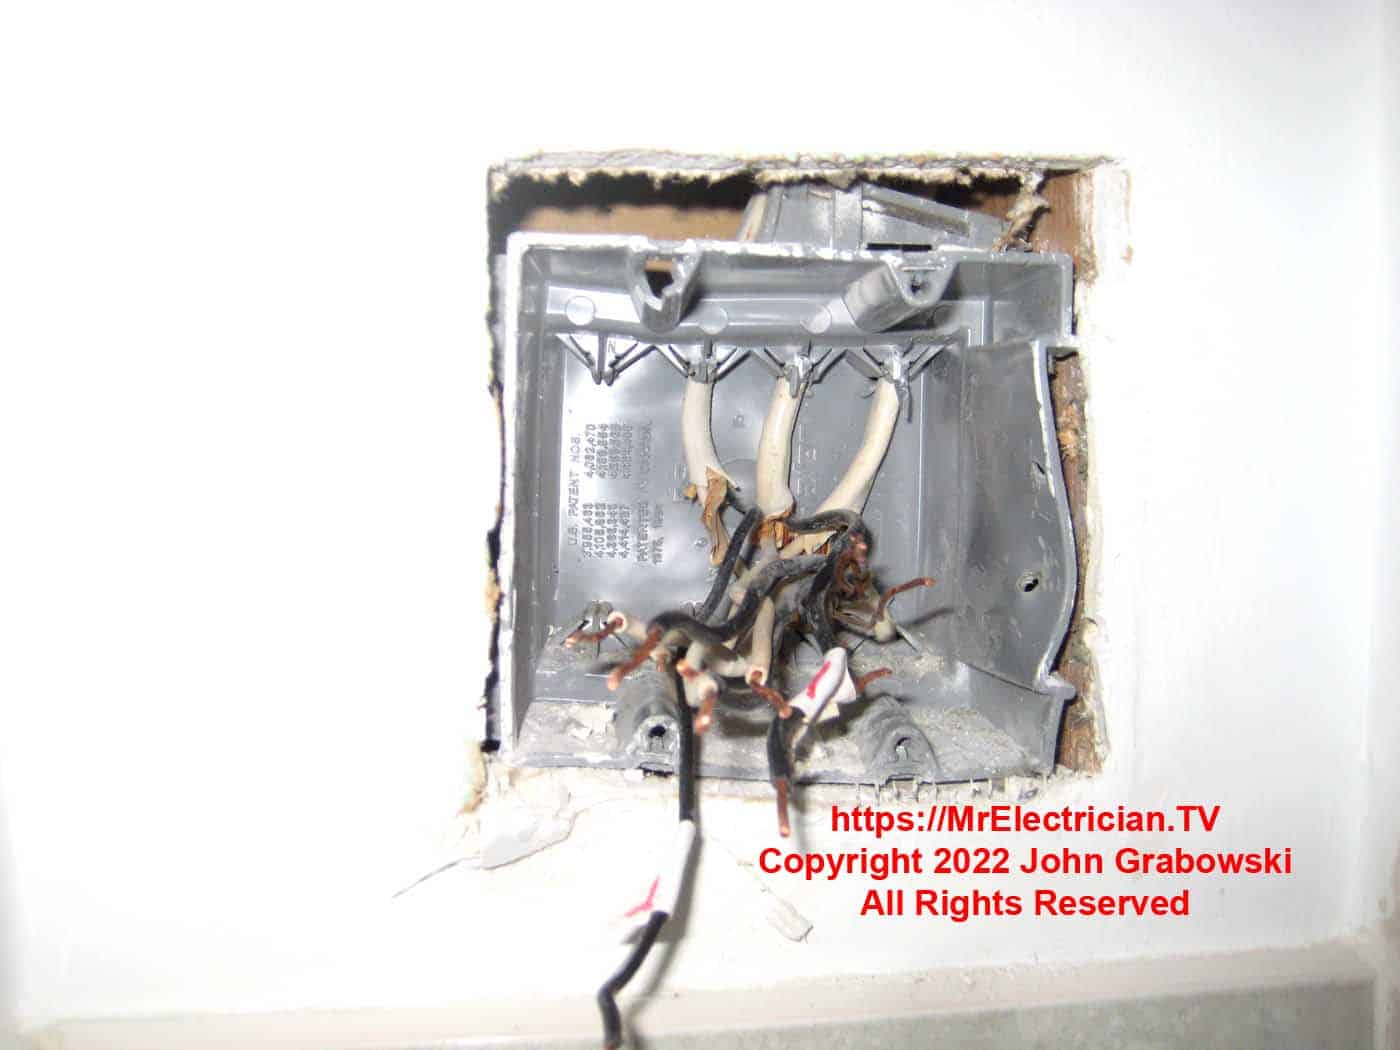 A broken PVC plastic, two gang electrical box wrongly installed in the wall